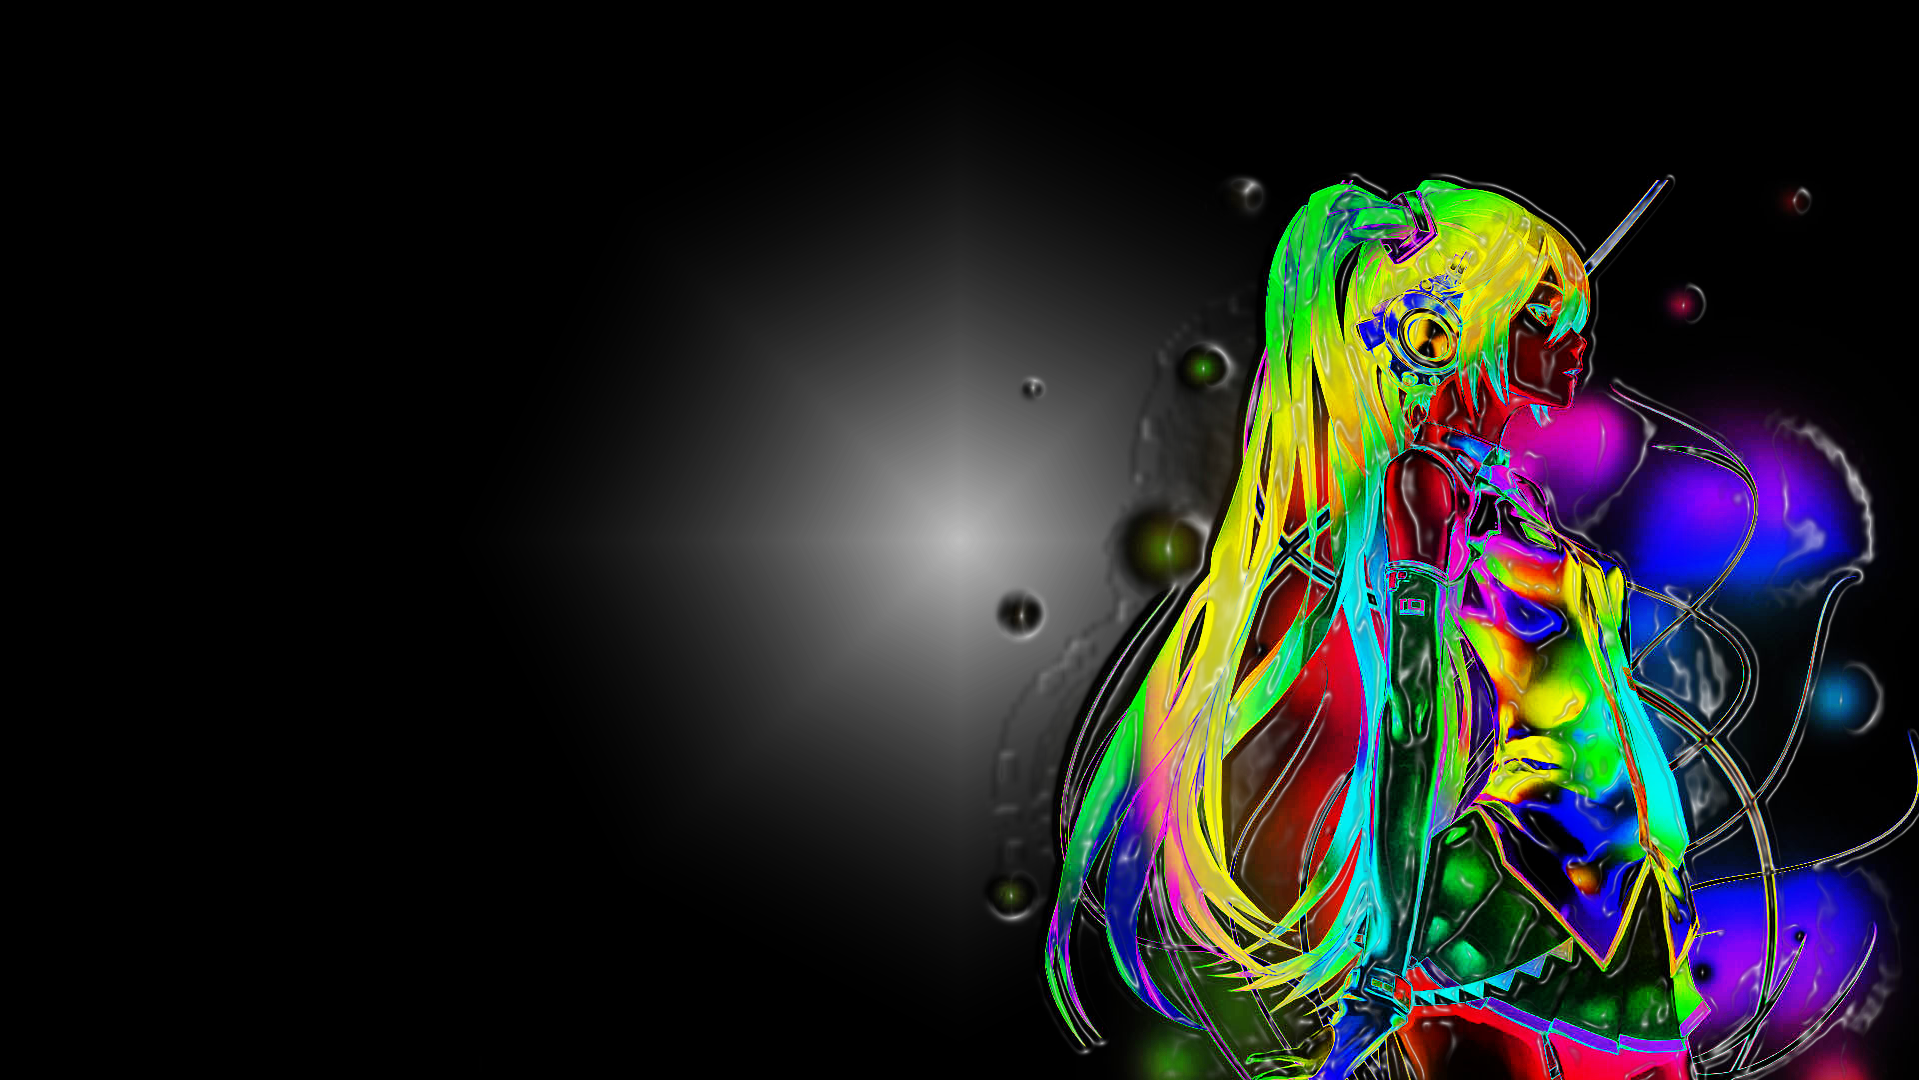  Neon 3D Hintergrundbild 1919x1080. Free download Anime Neon in 3D Wallpaper and Background 1919x1080 ID [1919x1080] for your Desktop, Mobile & Tablet. Explore 3D Anime Wallpaper. Anime Background, Background Anime, Anime Wallpaper